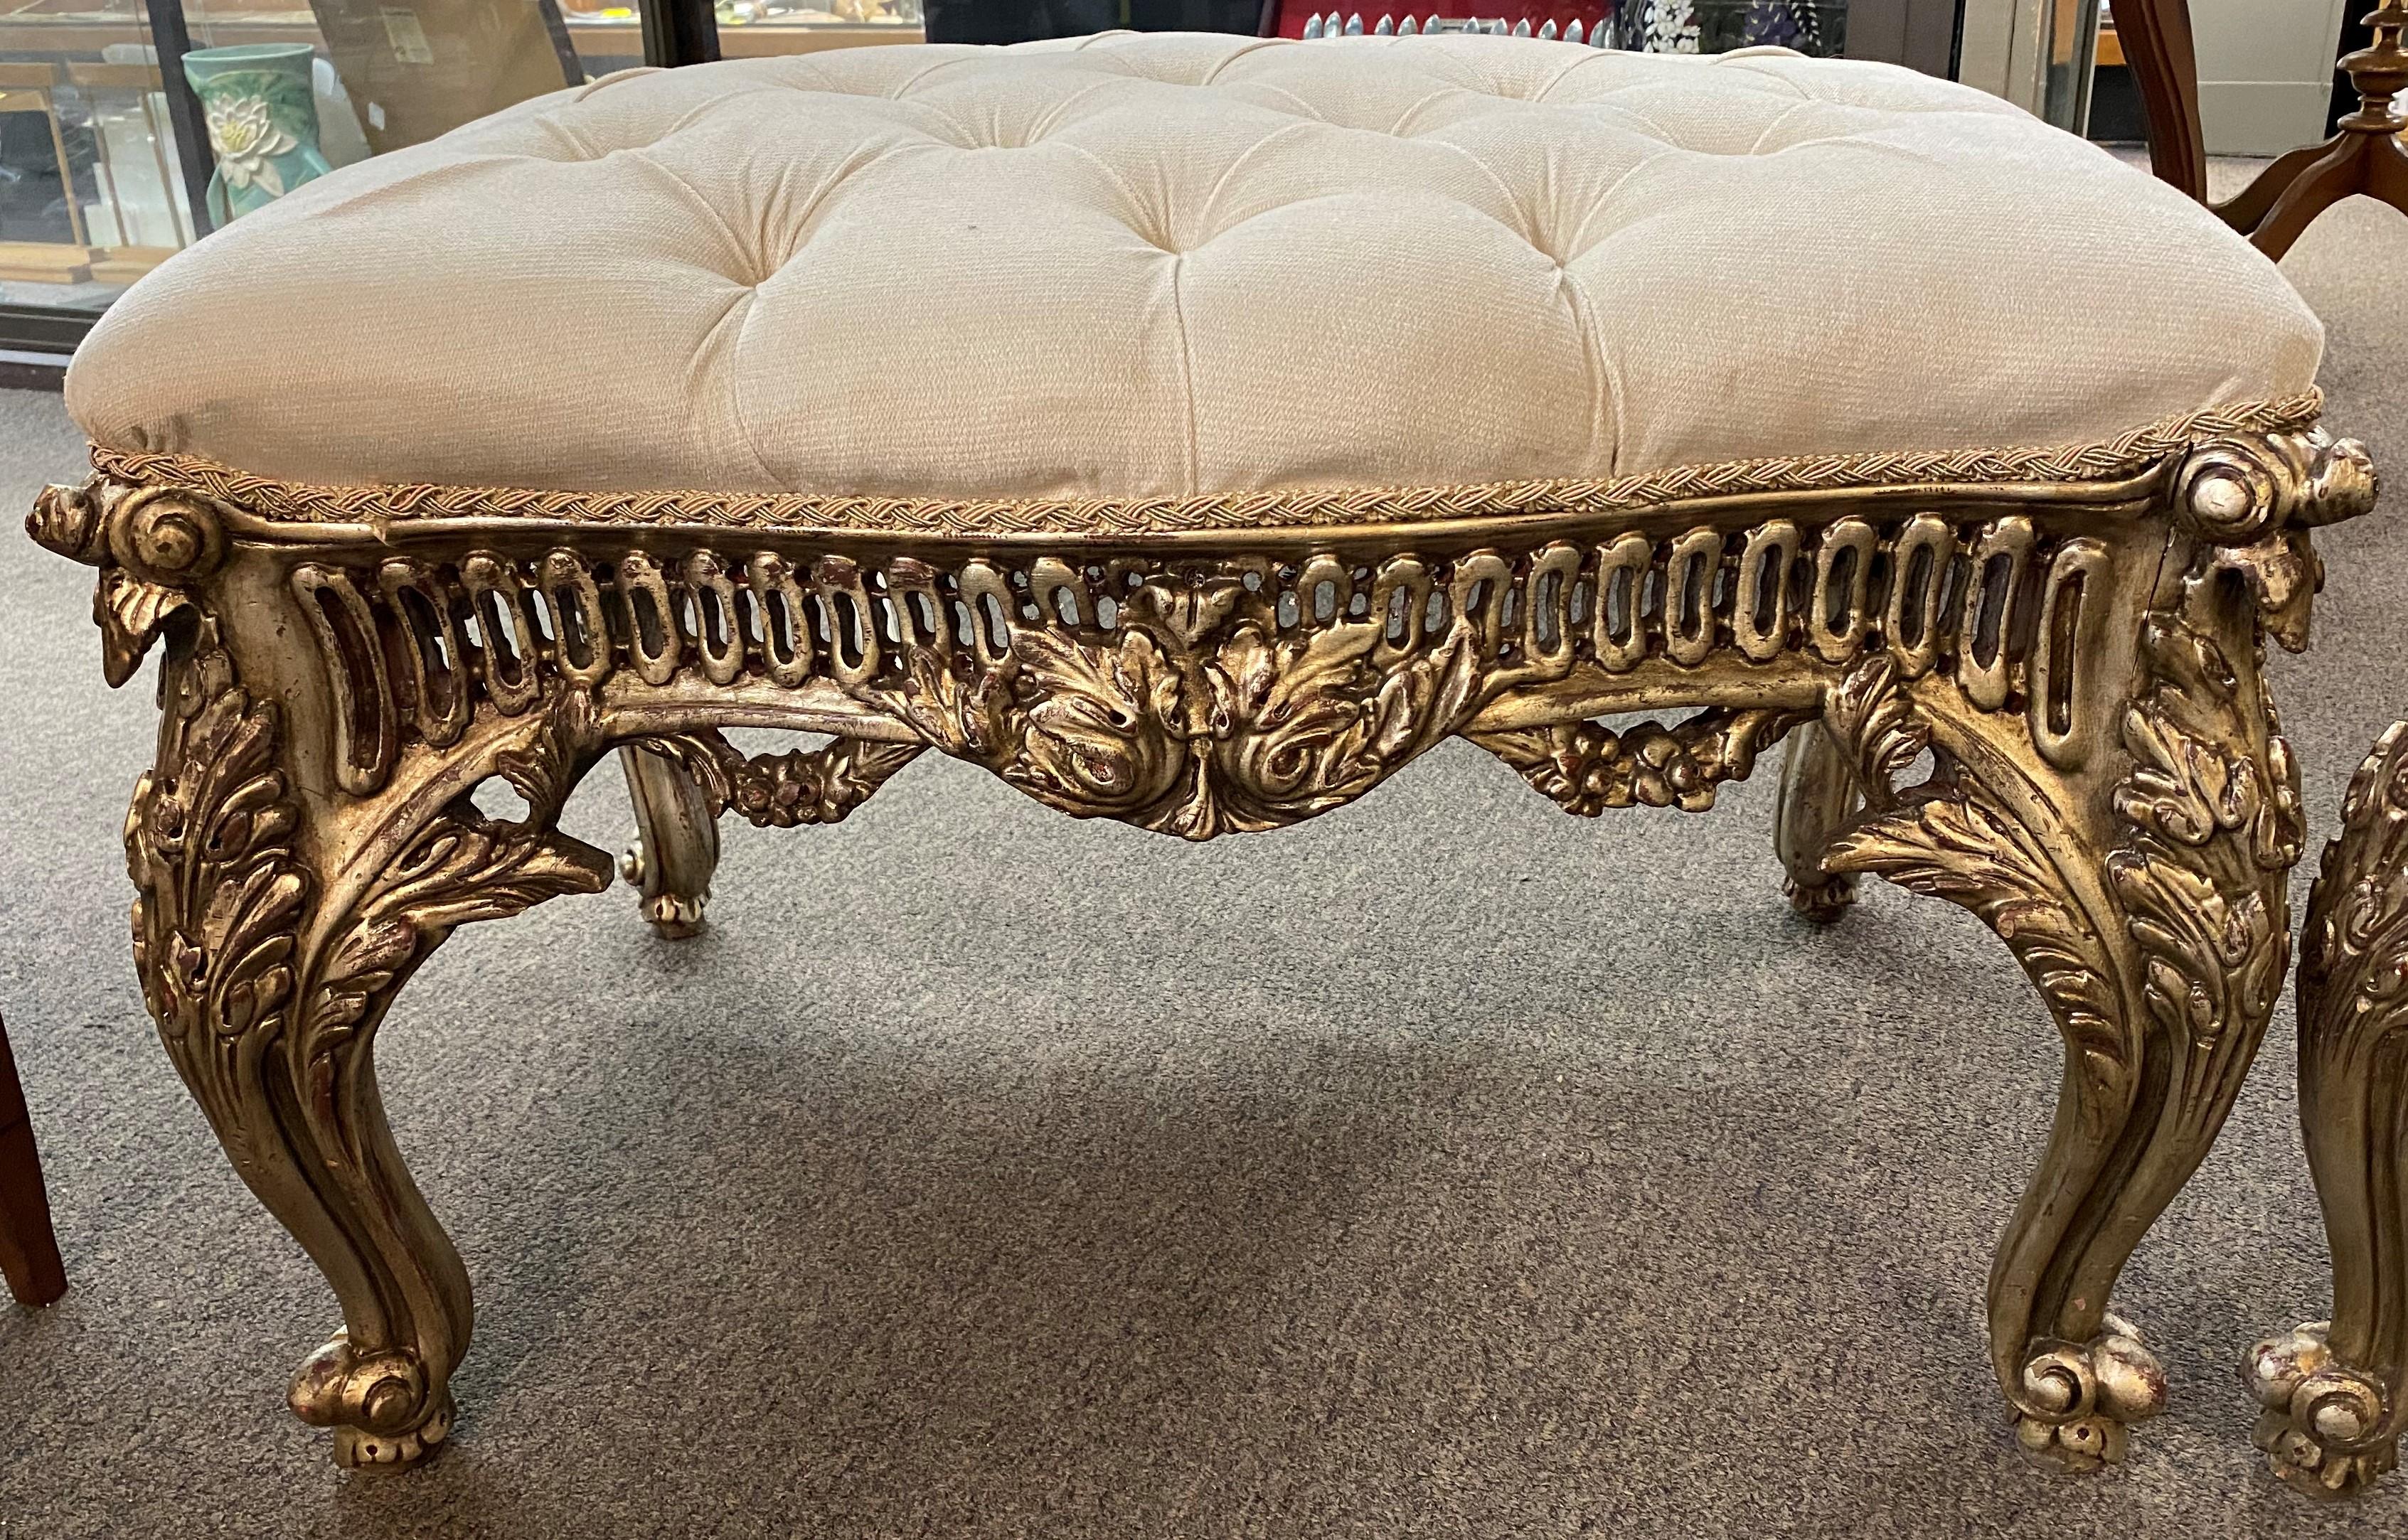 A decorative pair of Baroque or Rococo style wooden pierce carved silvered ottomans with foliate and scrollwork cabriole legs and tufted light gray upholstered cushions, dating to the 20th century. Very good overall condition with minor